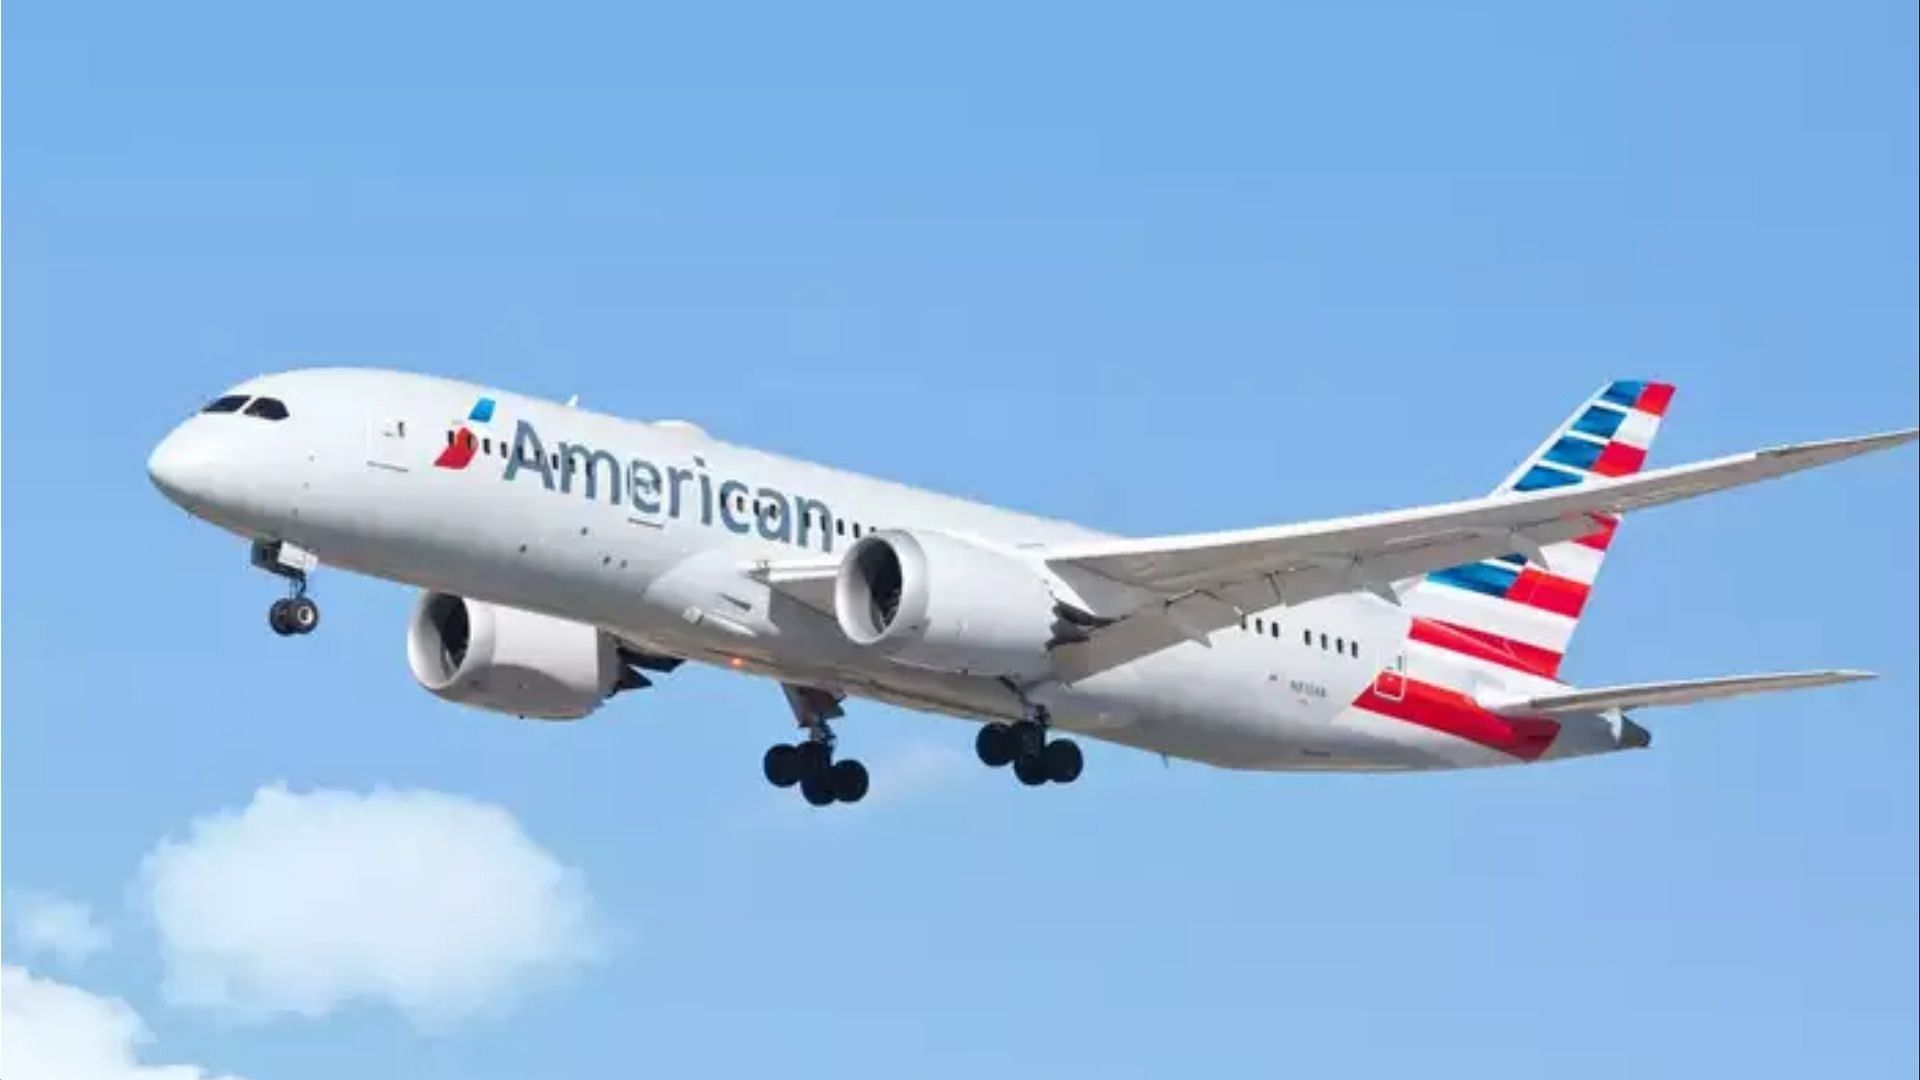 American Airlines passenger was kicked off of plane after taking a woman